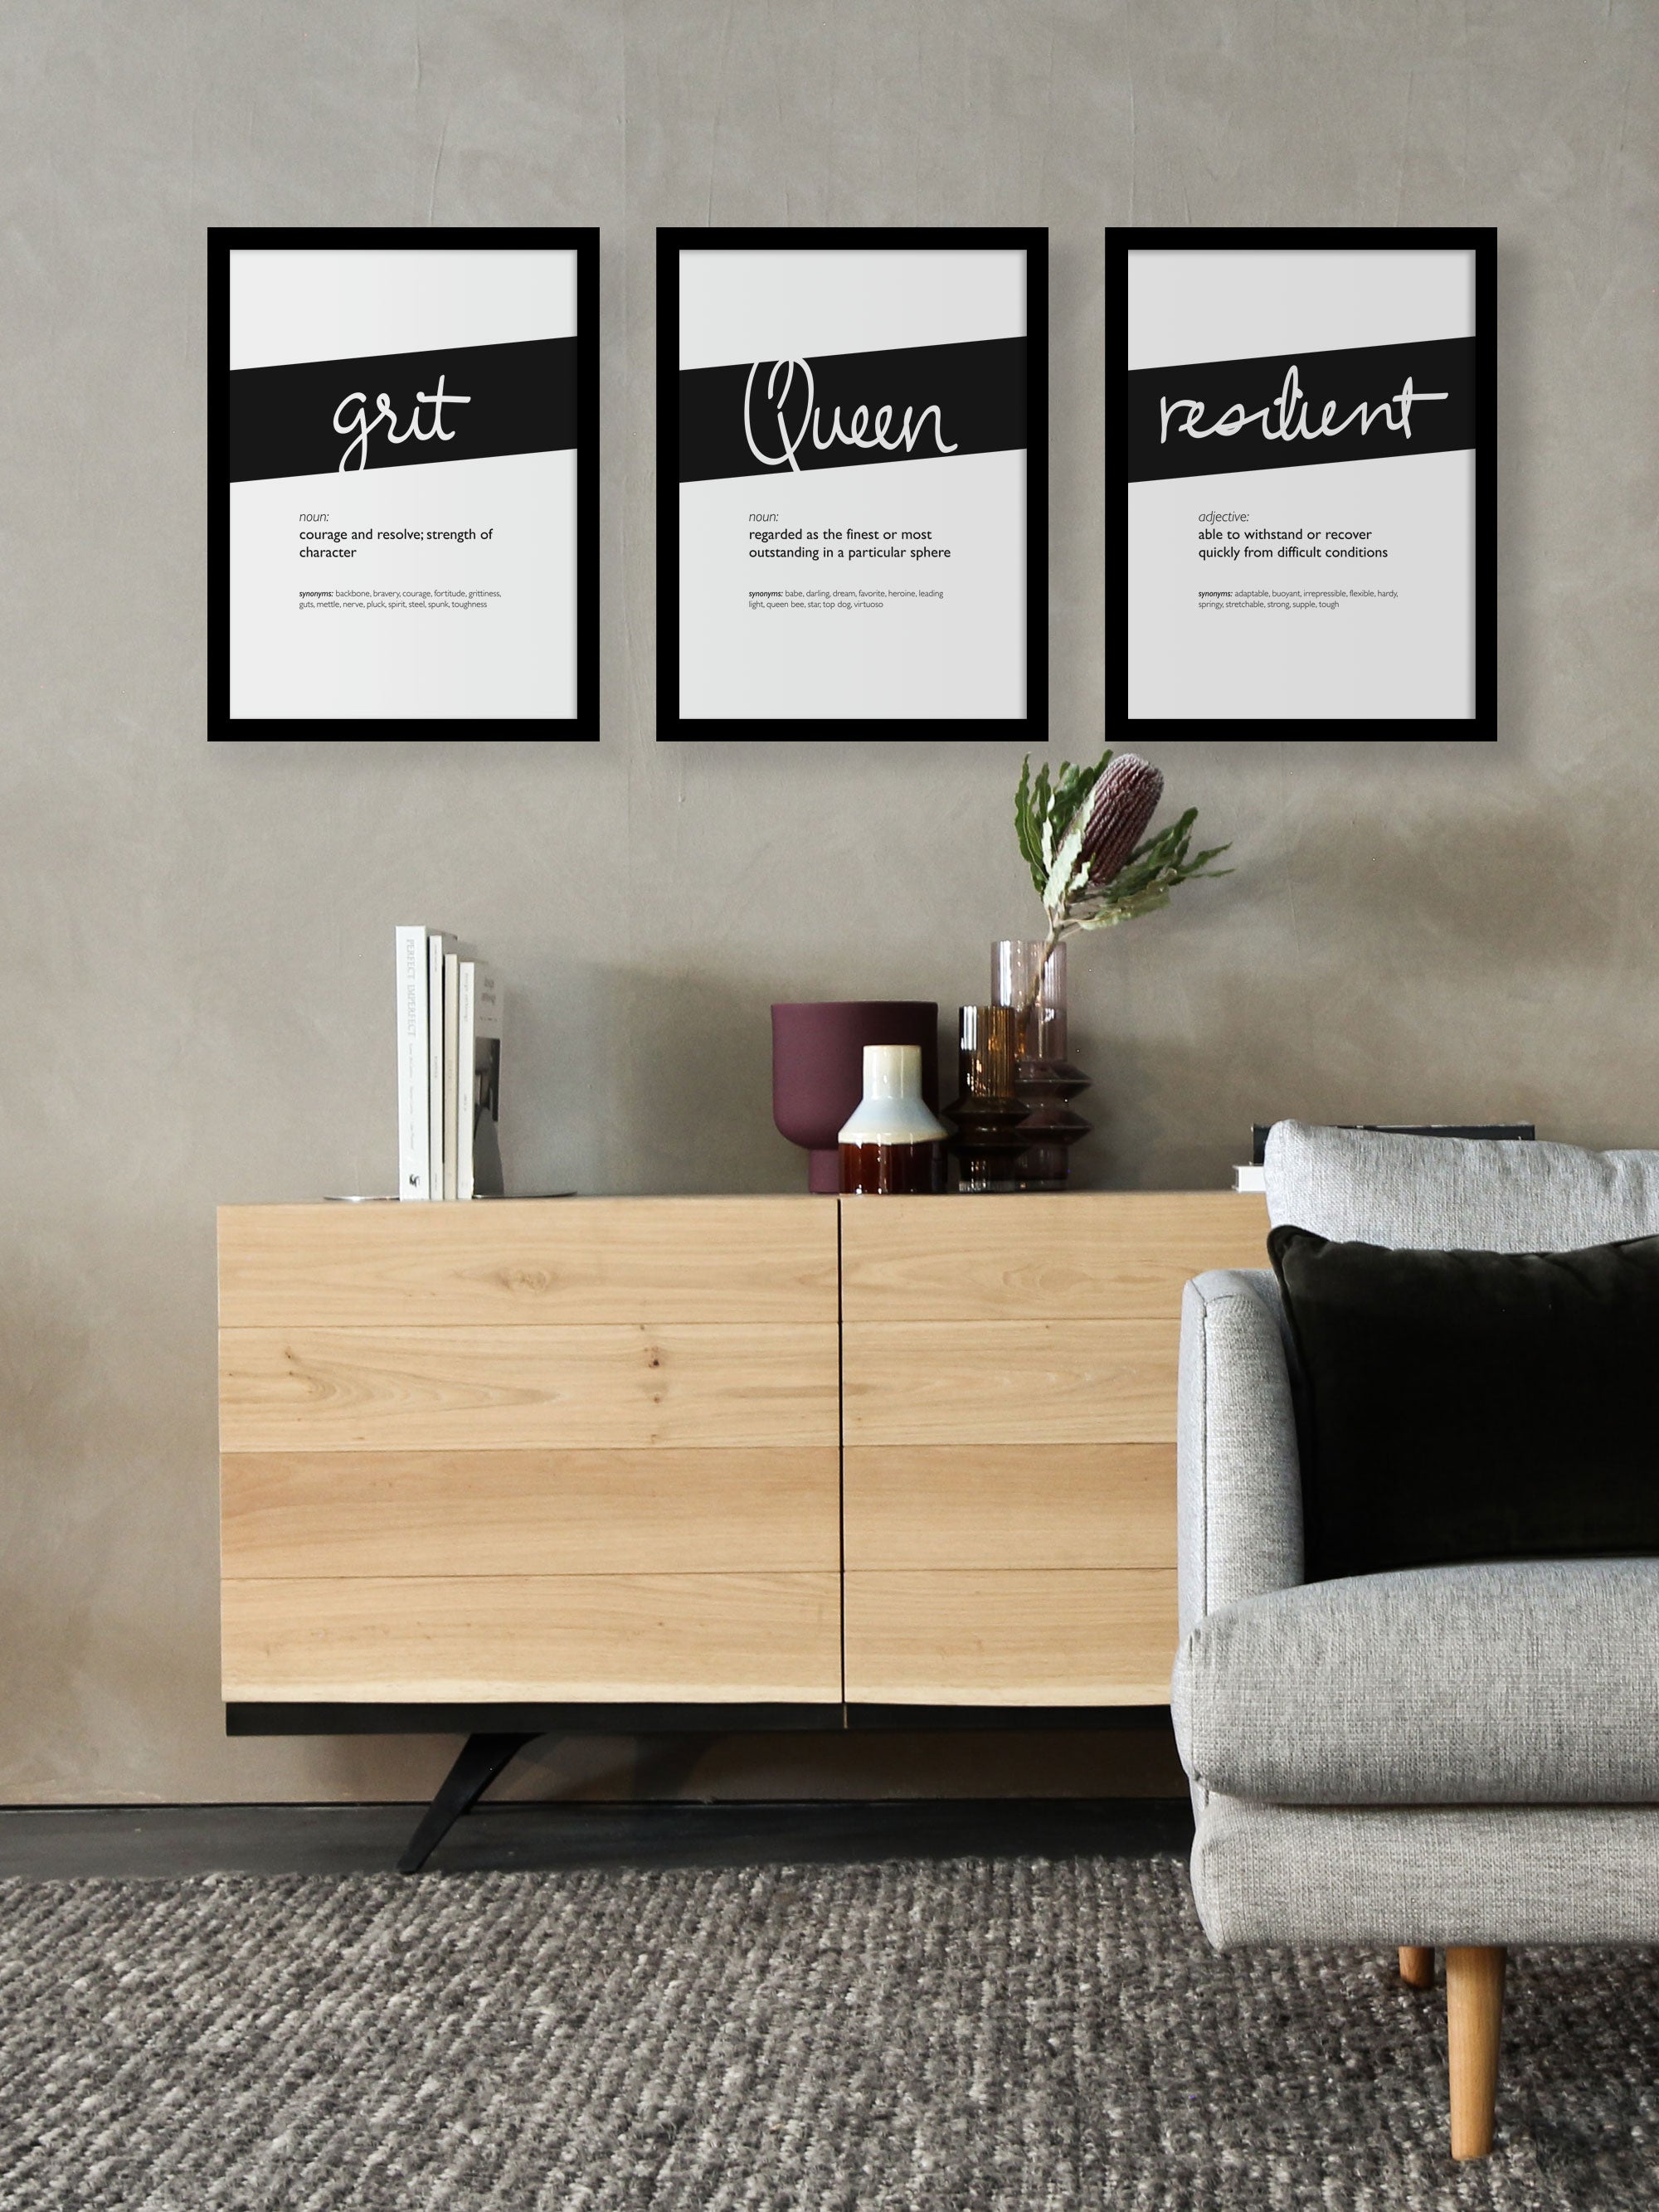 Framed Black Grit Print With Word Definition - High Quality, Affordable, Hand Written, Empowering, Self Love, Mantra Word Print. Archival-Quality, Matte Giclée Print - Brevity Jewelry